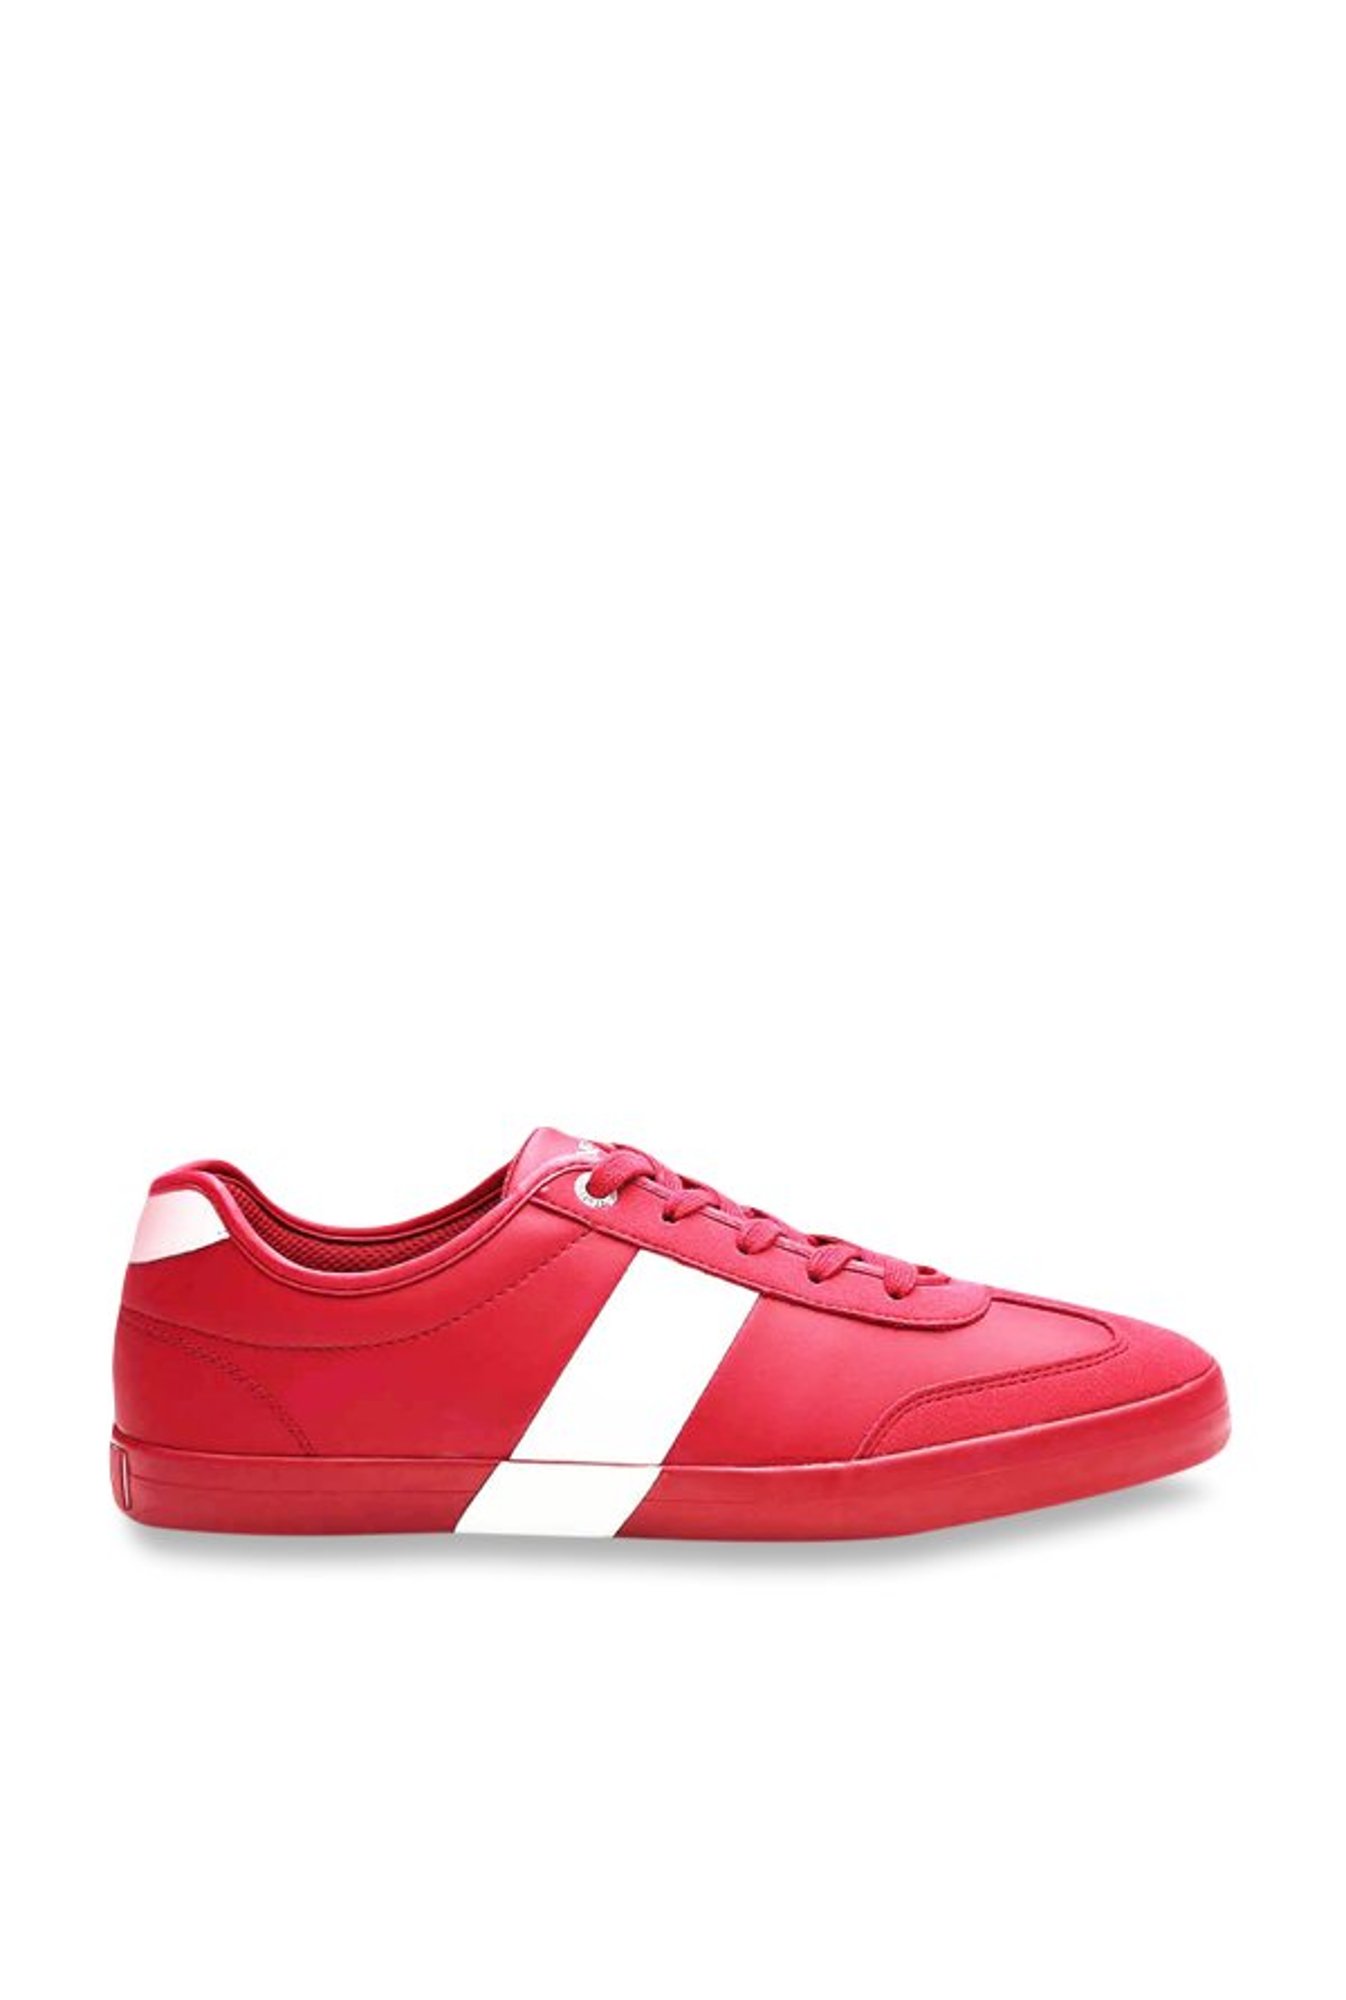 benetton red shoes